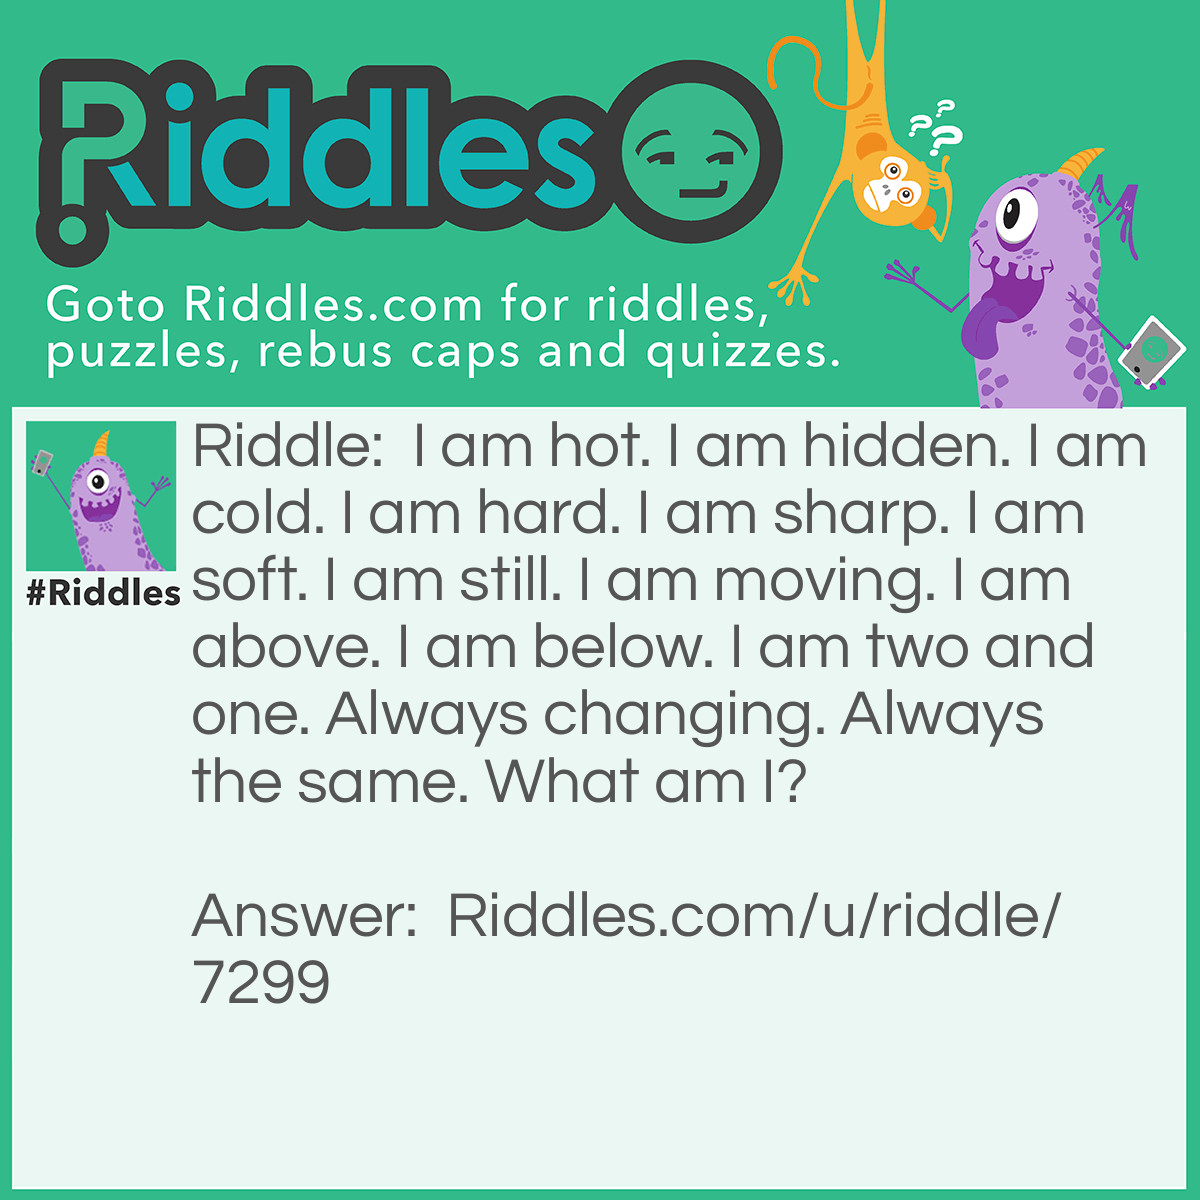 Riddle: I am hot. I am hidden. I am cold. I am hard. I am sharp. I am soft. I am still. I am moving. I am above. I am below. I am two and one. Always changing. Always the same. What am I? Answer: Water.